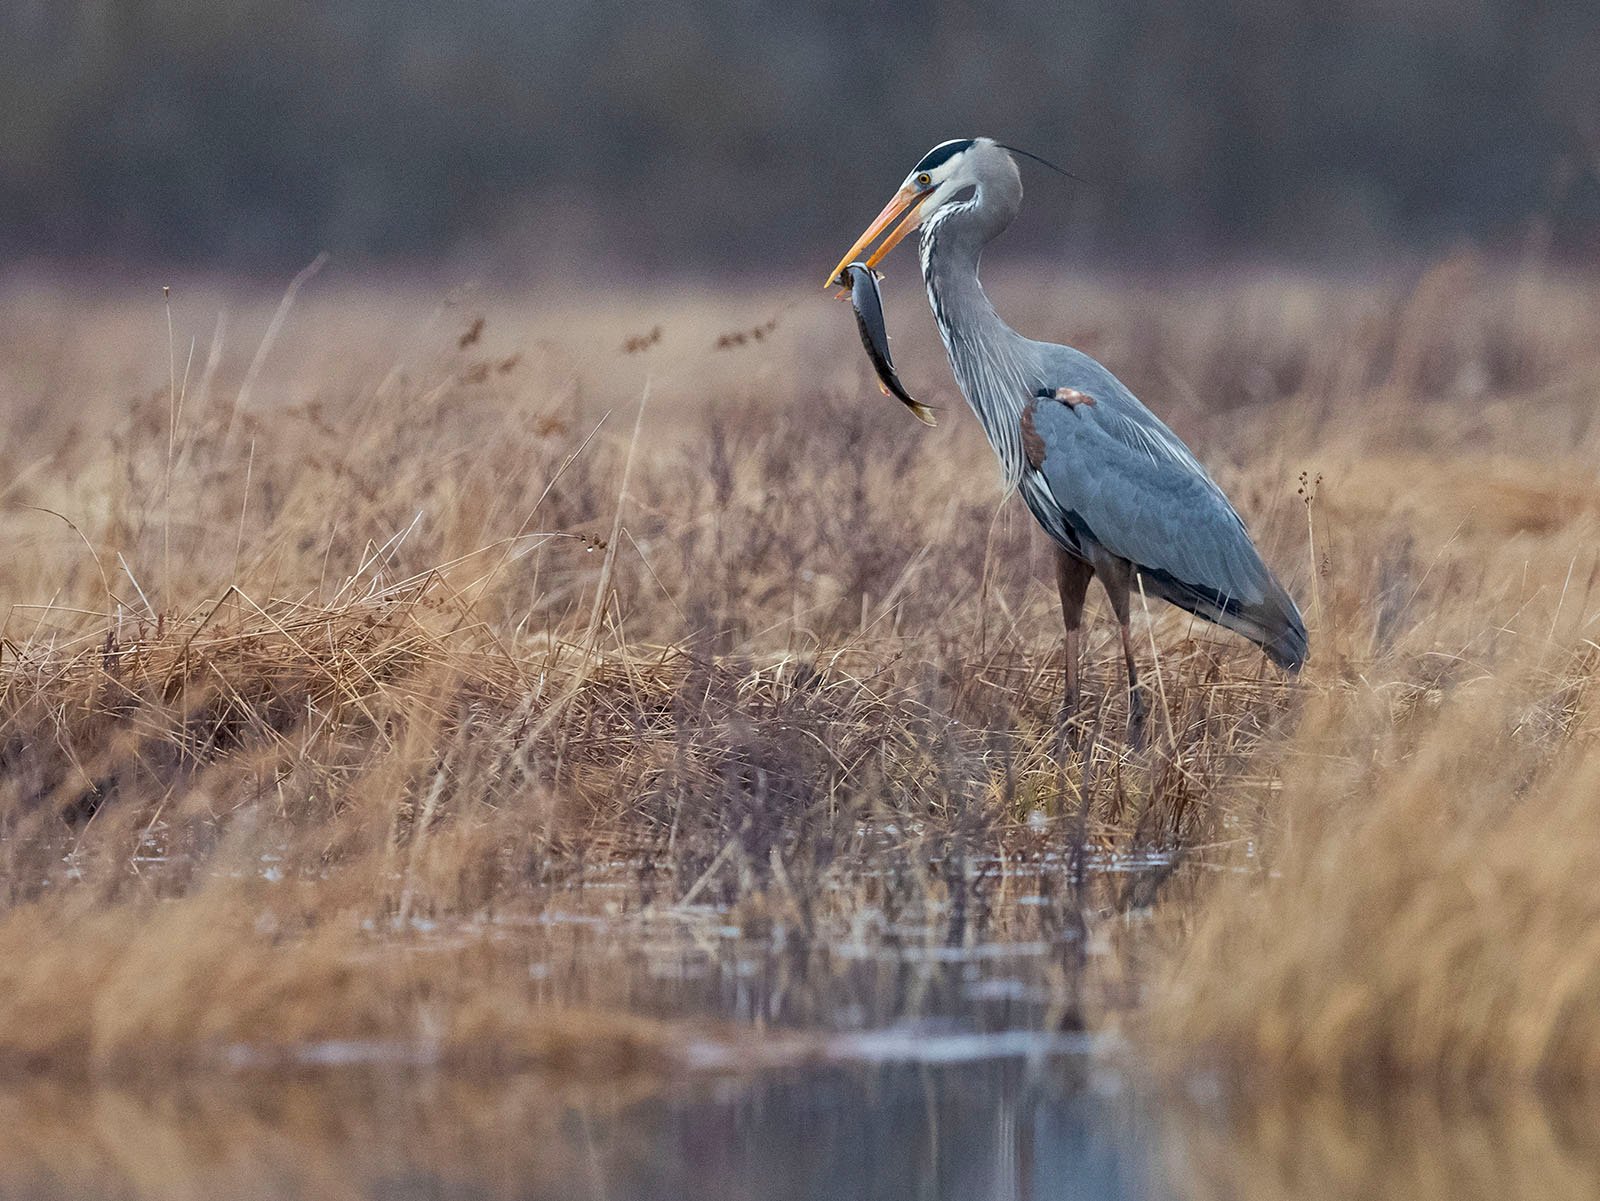 In a quiet marsh, a great blue heron stood in shallow water among tall dry grass, holding a fish in its mouth.